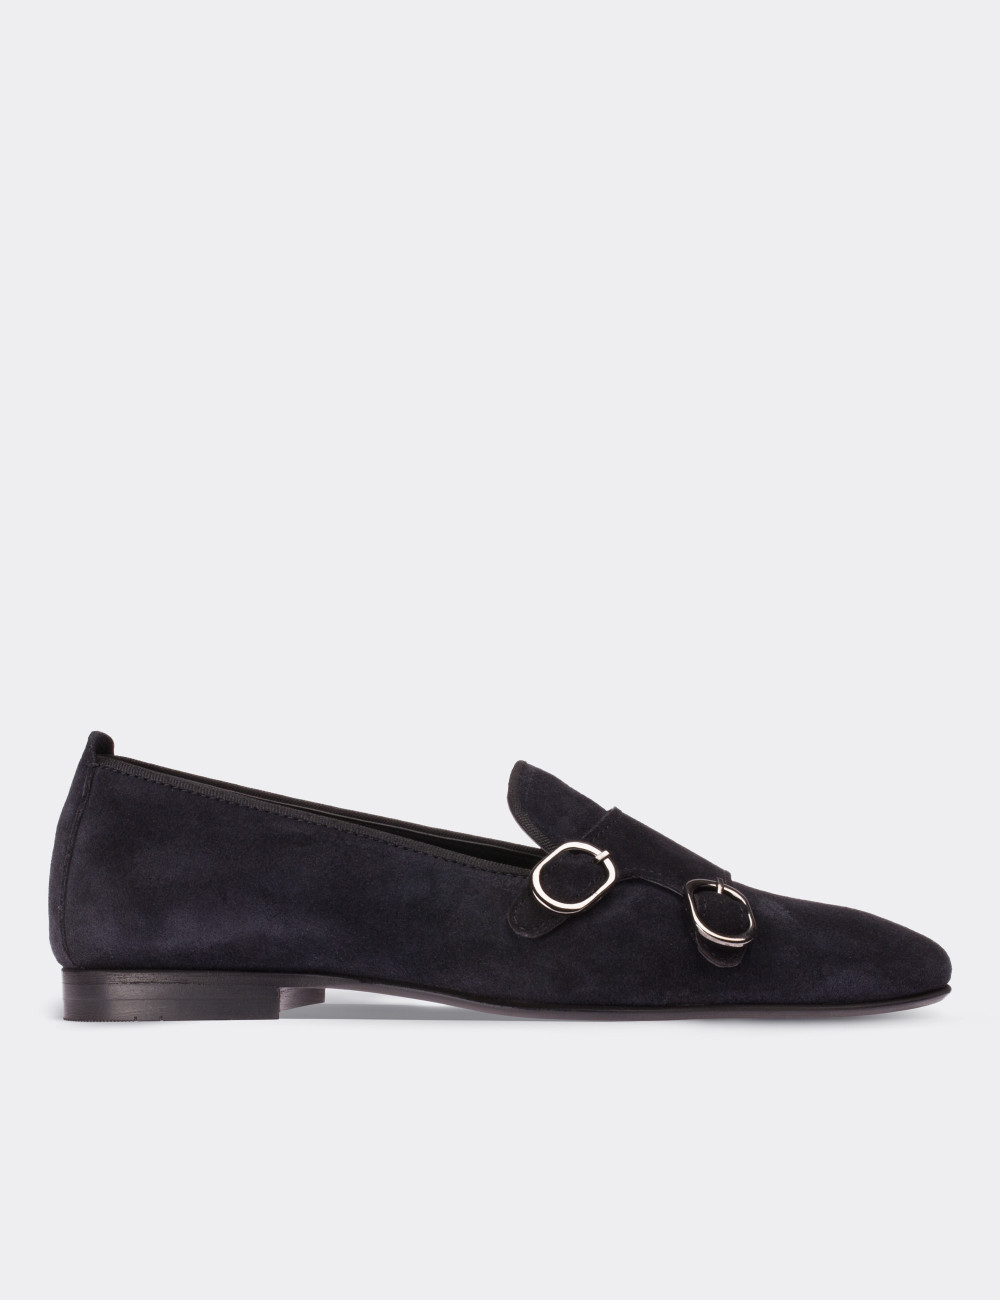 Navy Suede Leather Loafers - 01611ZLCVM02